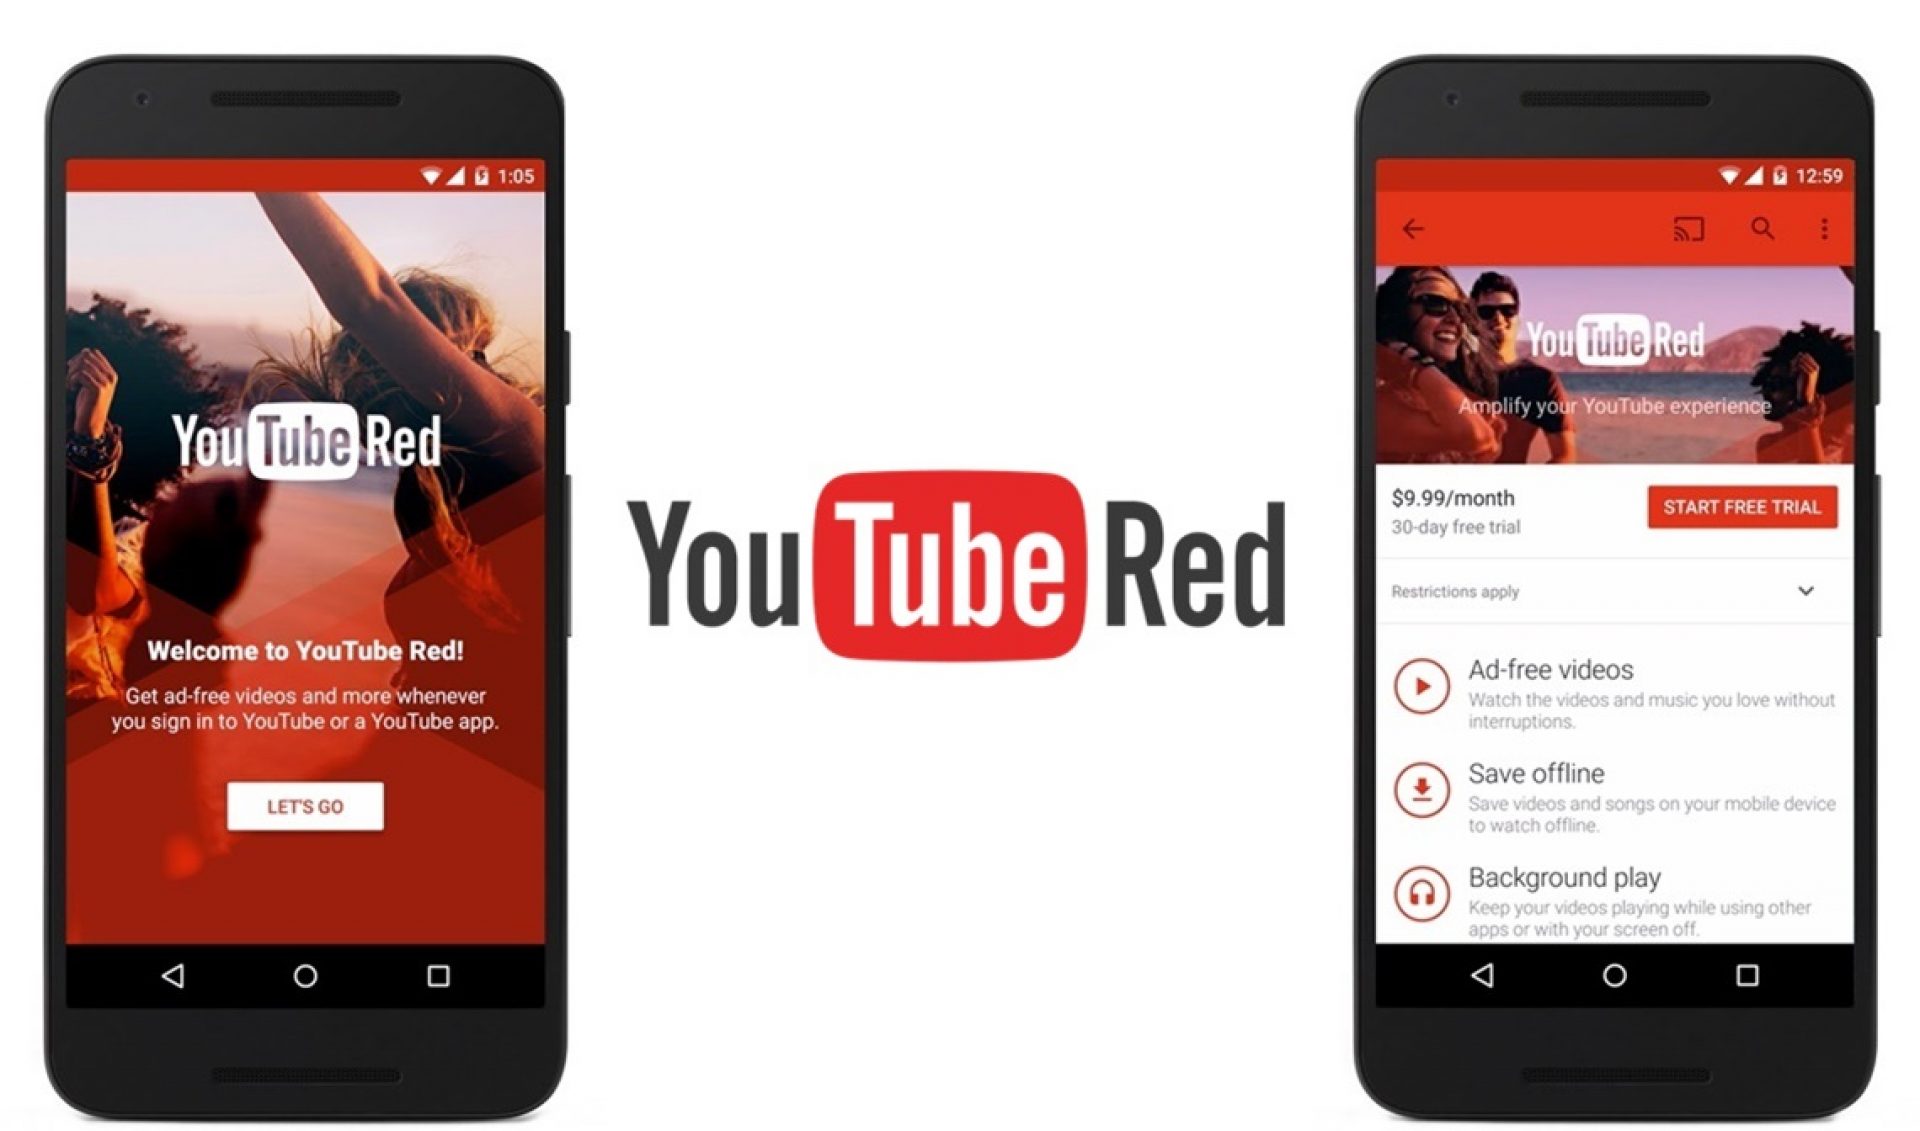 YouTube Red Now Ranks Among Top-Grossing Apps On iOS